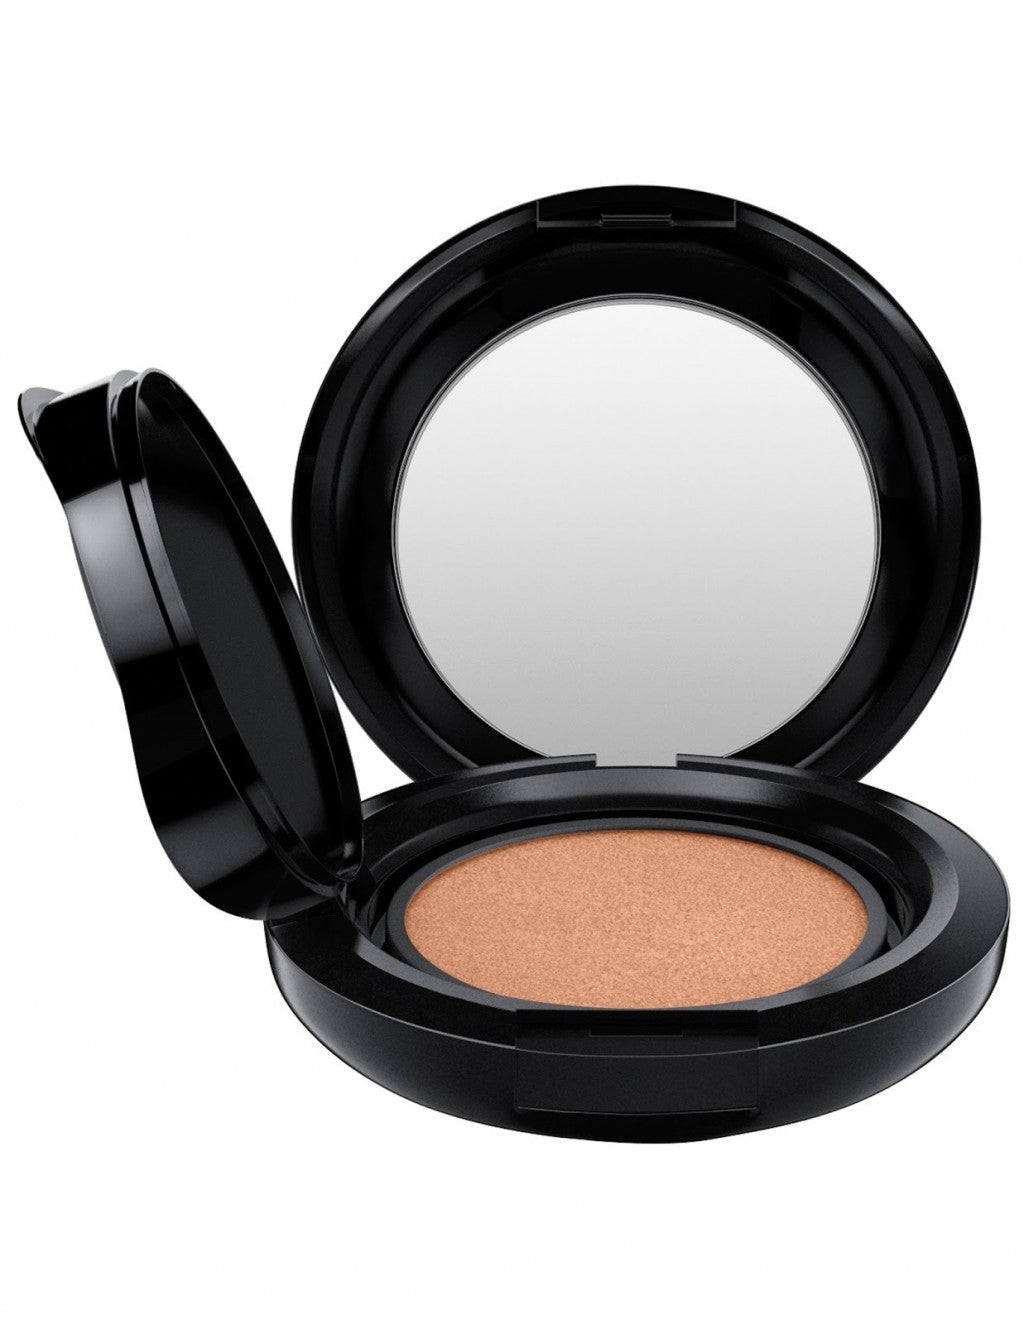 MAC Matchmaster Shade Intelligence Compact Features ( 5.0 )